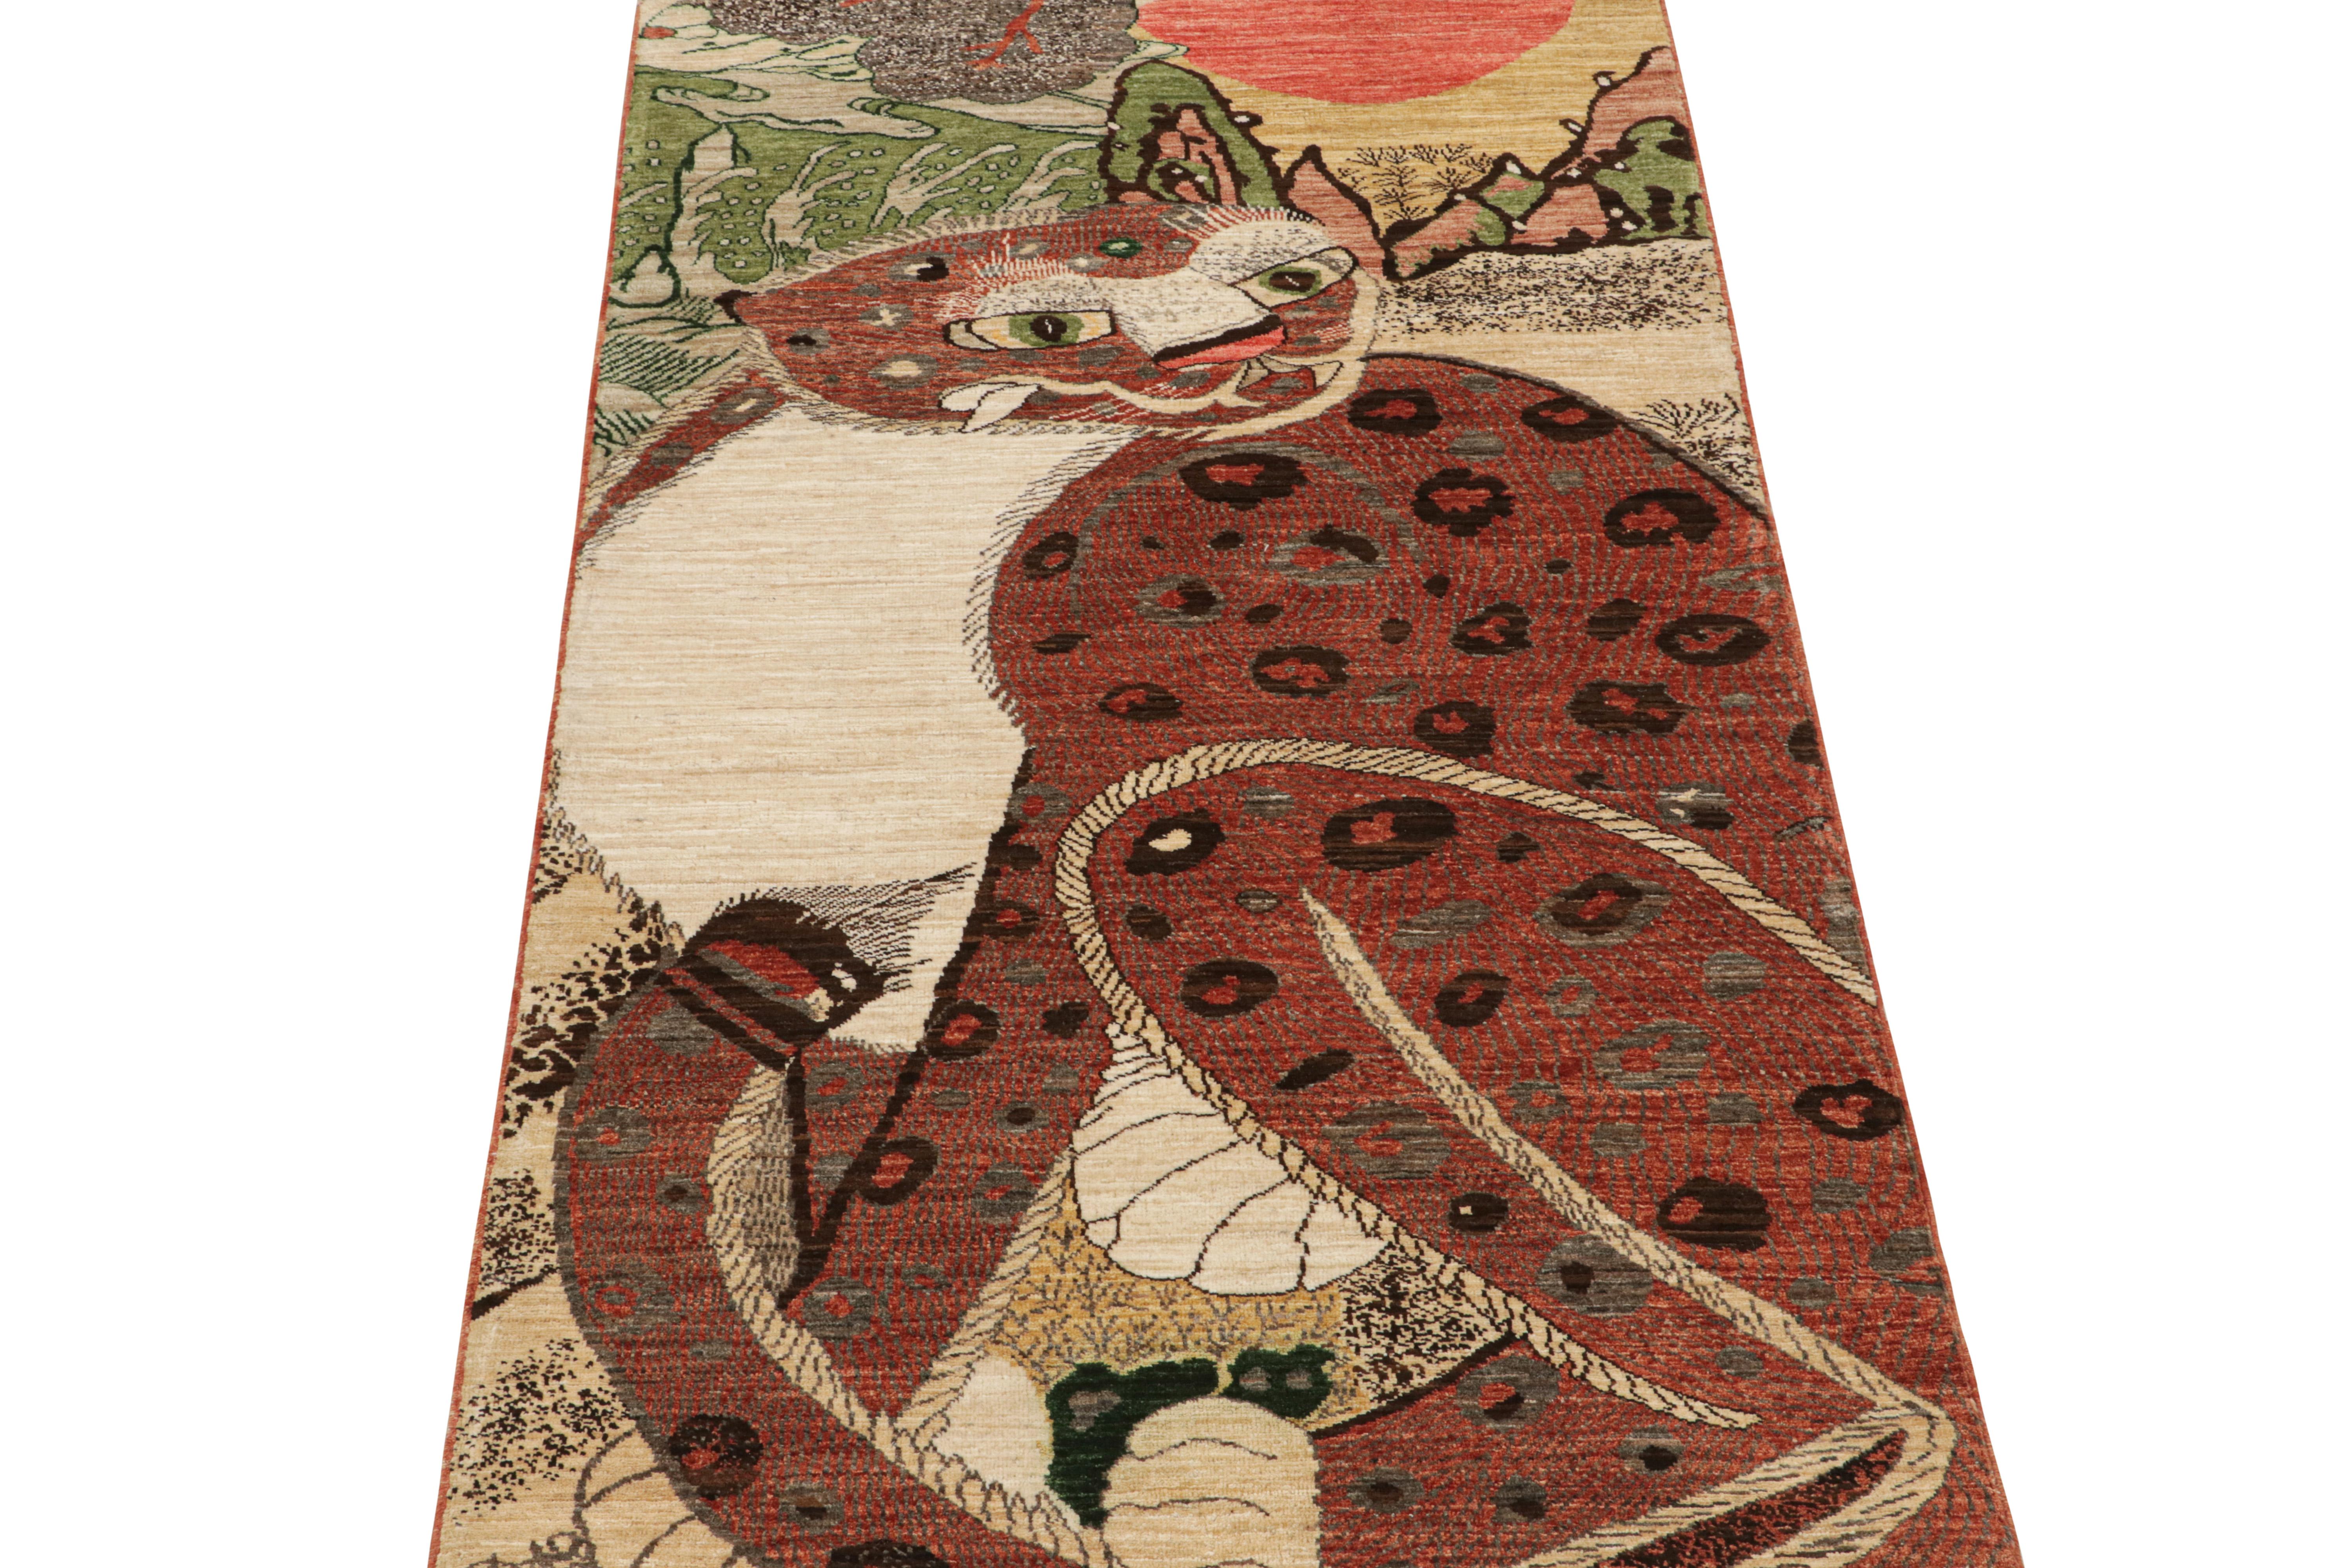 This contemporary 3x6 pictorial runner is a bold new addition to Rug & Kilim’s Tigers Collection. Our collection spans several cultures and recaptures iconic pictorial styles in folk art and handmade Oriental rugs alike. 

Further on the